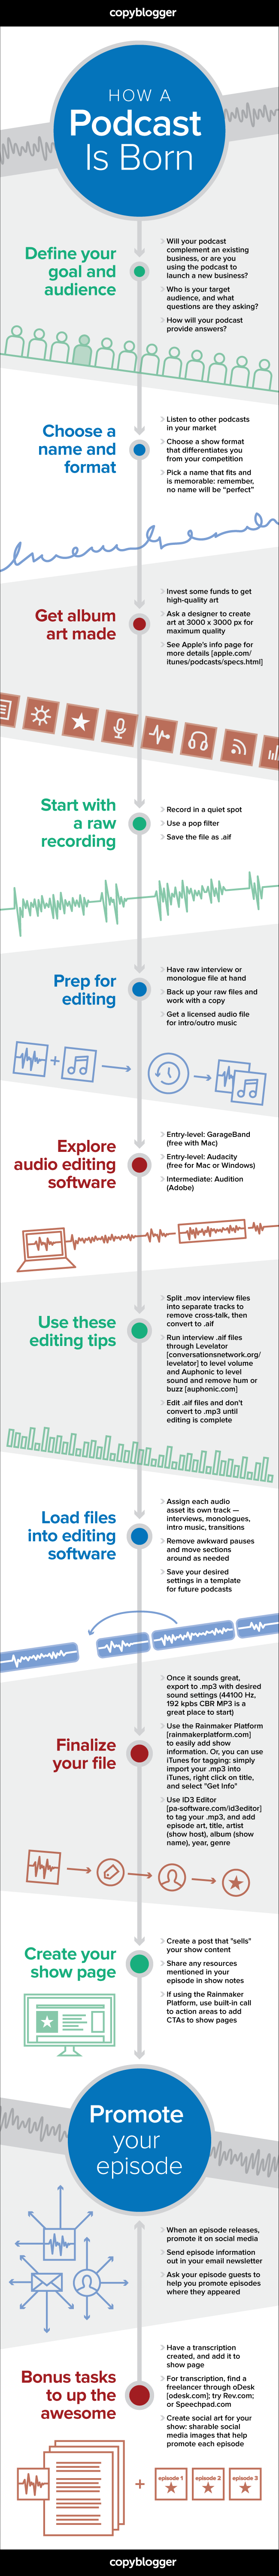 copyblogger-how-a-podcast-is-born-infographic